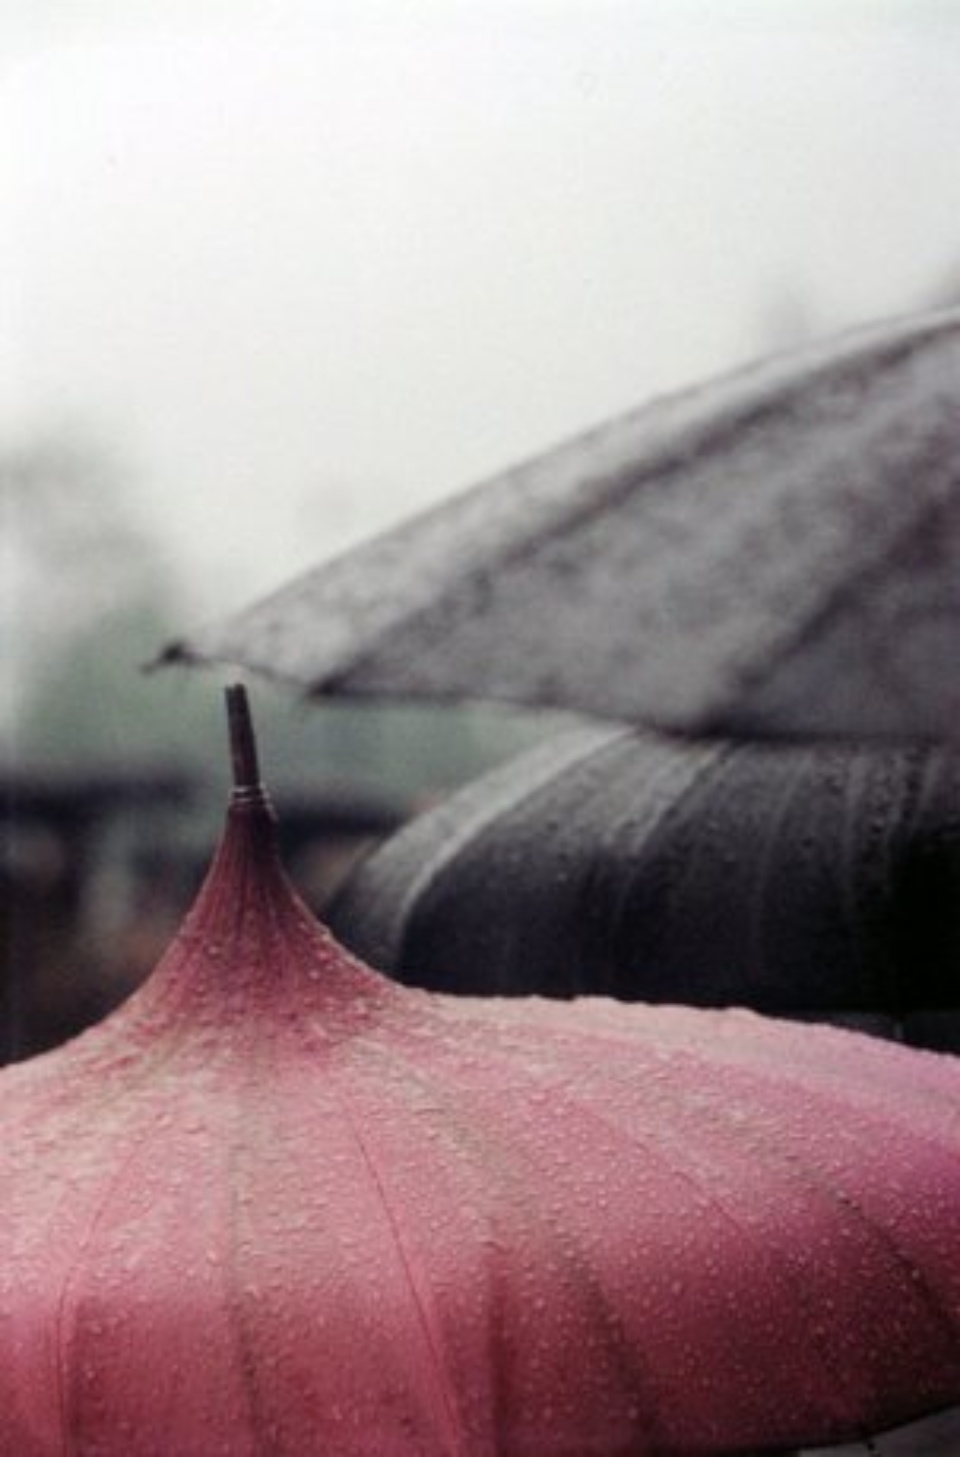 Saul Leiter Untitled (Pink umbrella close up) 1958 Chromogenic Print, printed later Signed on verso 50 x 40 cm Ed. 10